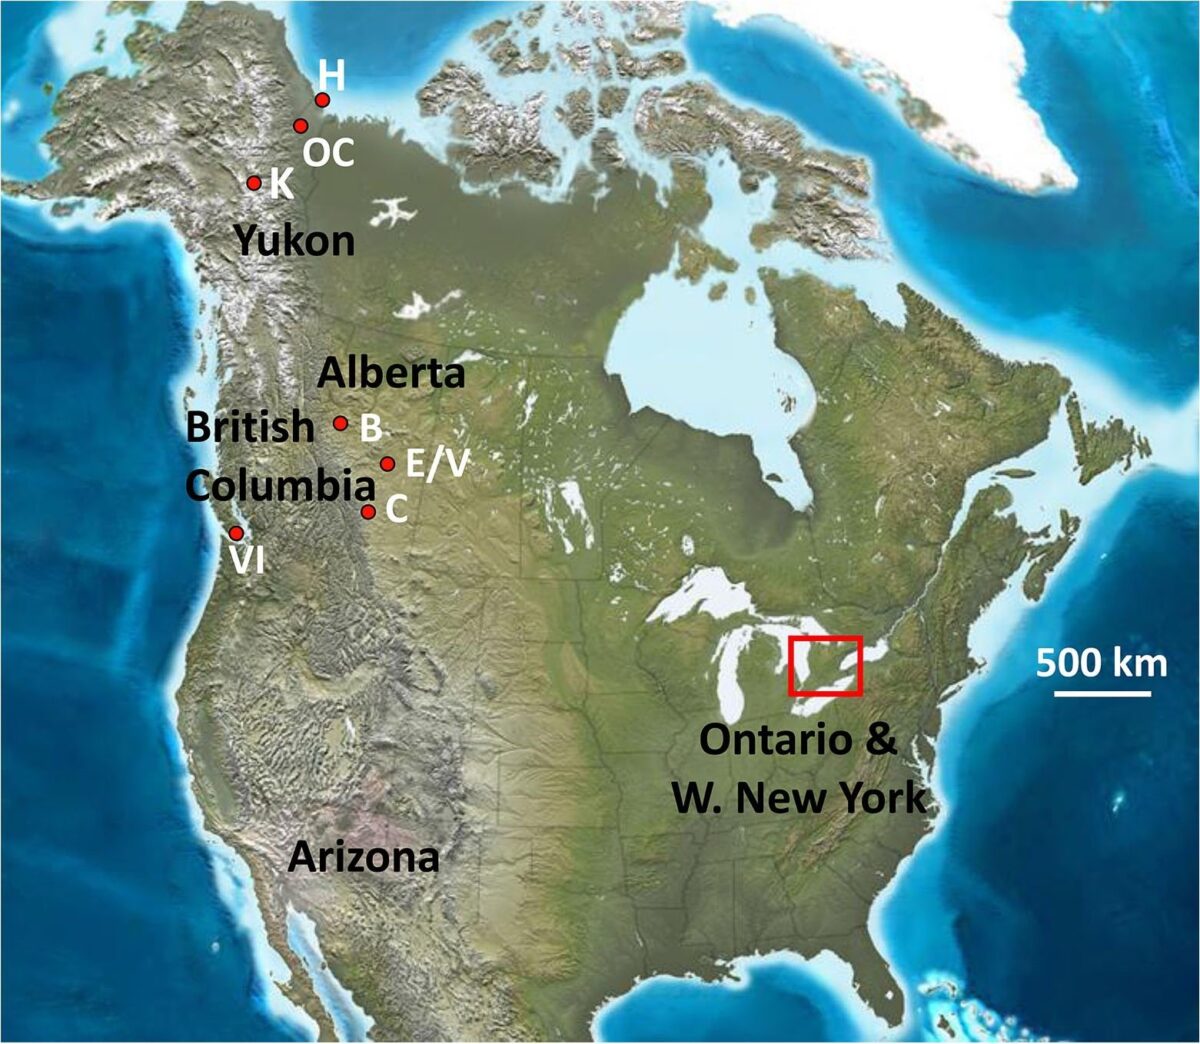 Taxonomy, location of origin and health status of proboscideans from Western Canada investigated using stable isotope analysis